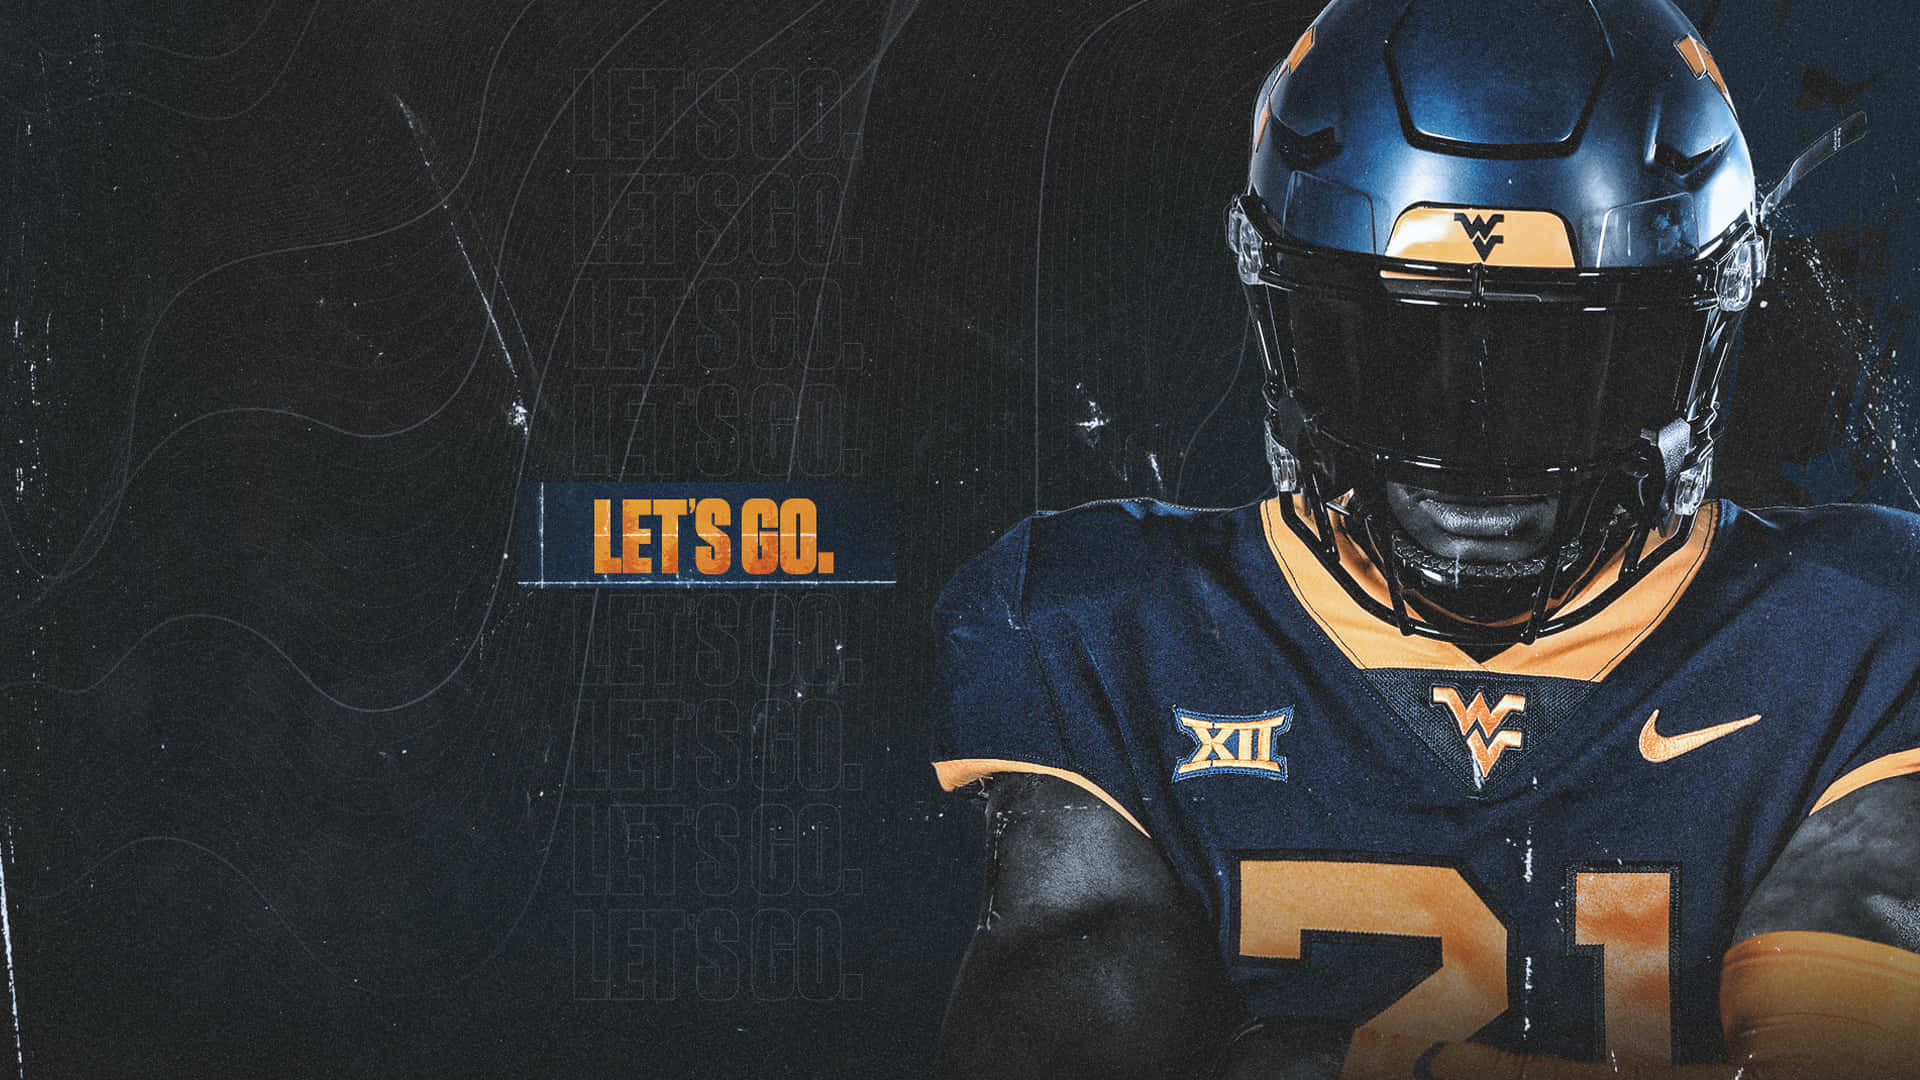 Get Ready To Cheer On The West Virginia Mountaineers! Background